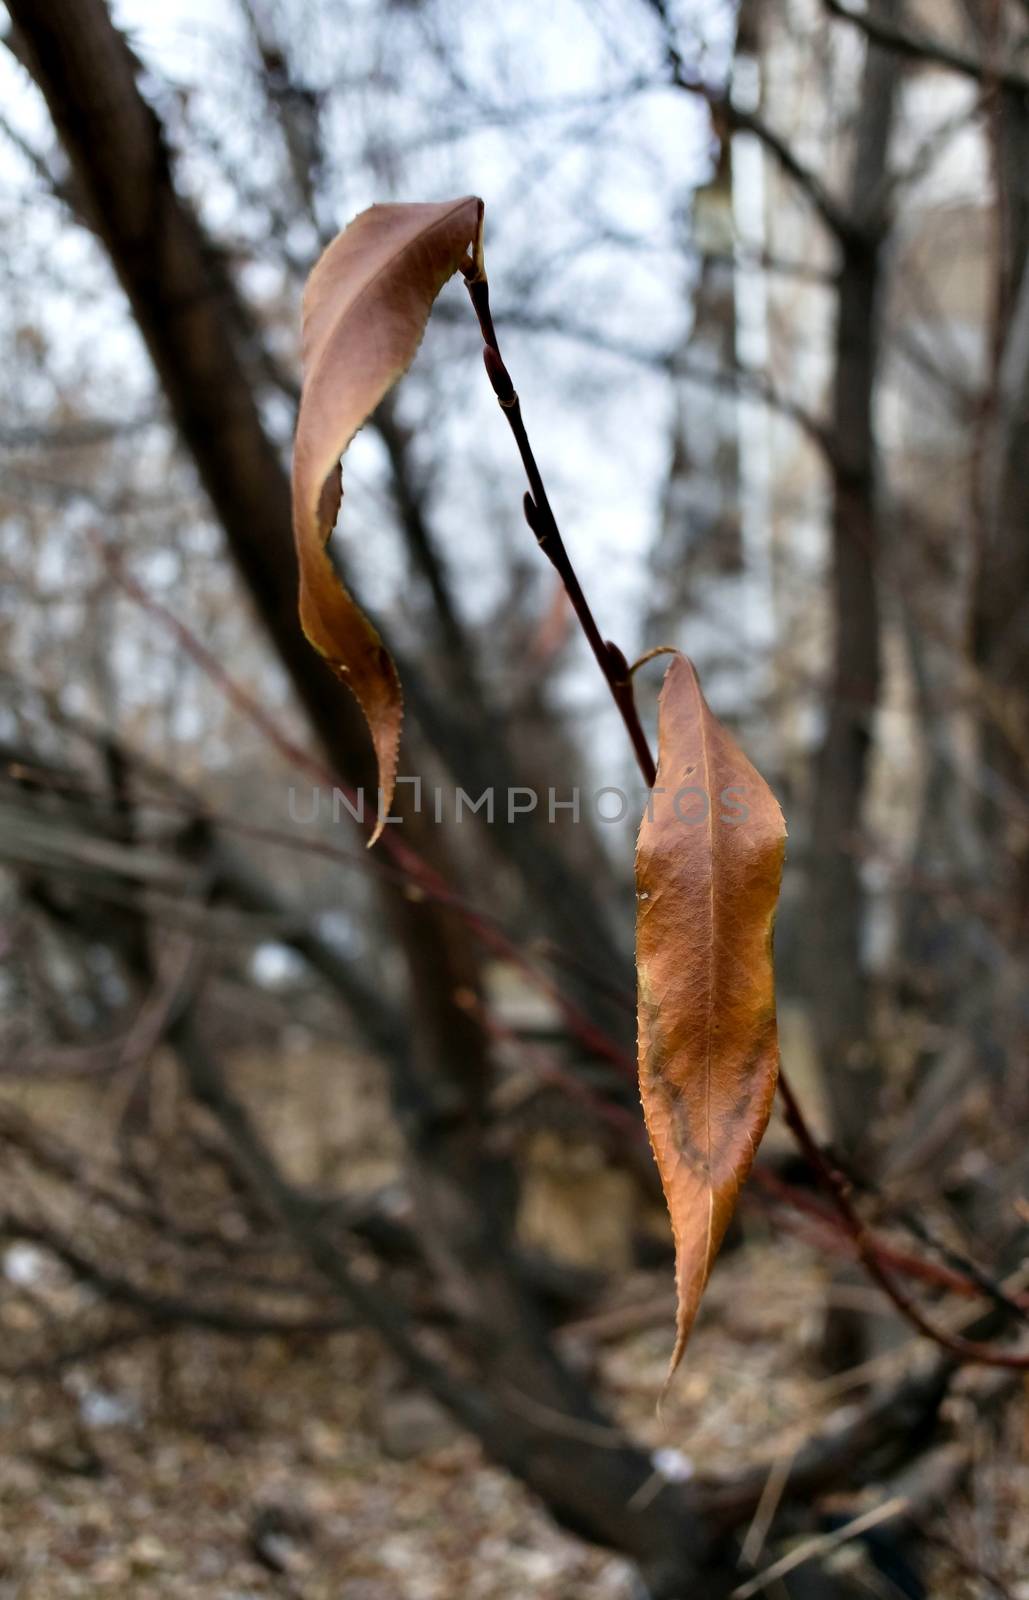 dry leaves on the branch in late autumn on blurred landscape